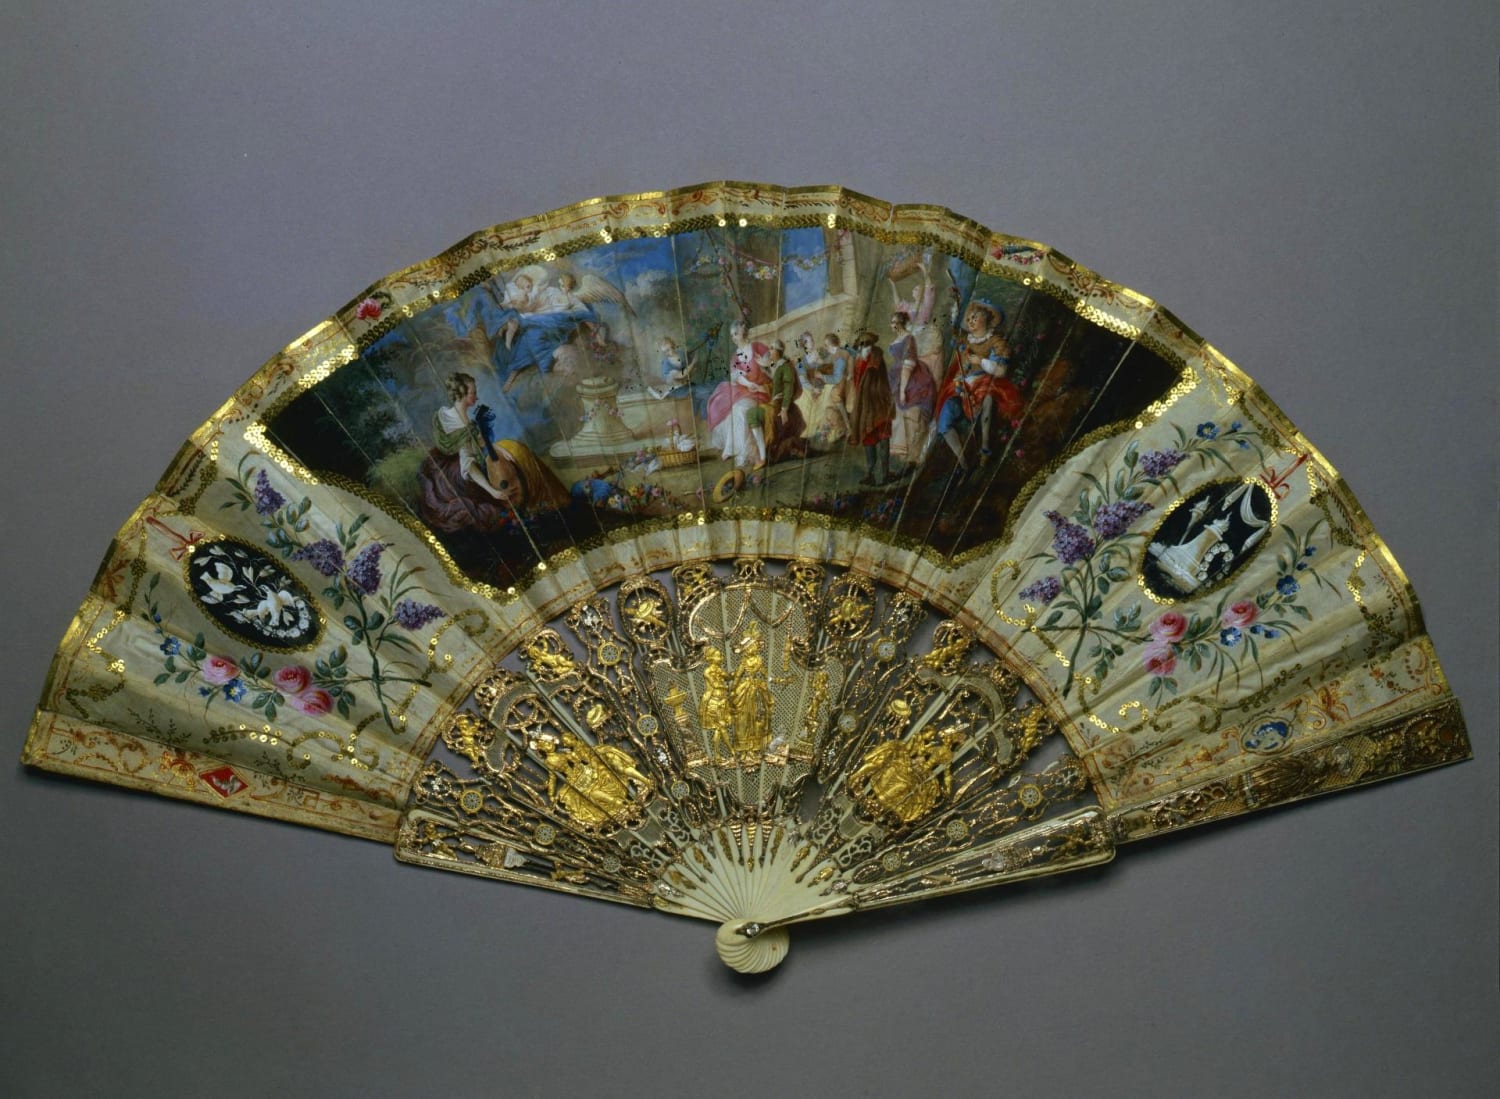 Folding Fan Showing the Painting of Alphonse Giroux "Altar of Love", Unknown craftsman, 1770s, England. Materials: ivory, paper, gouache, sequins